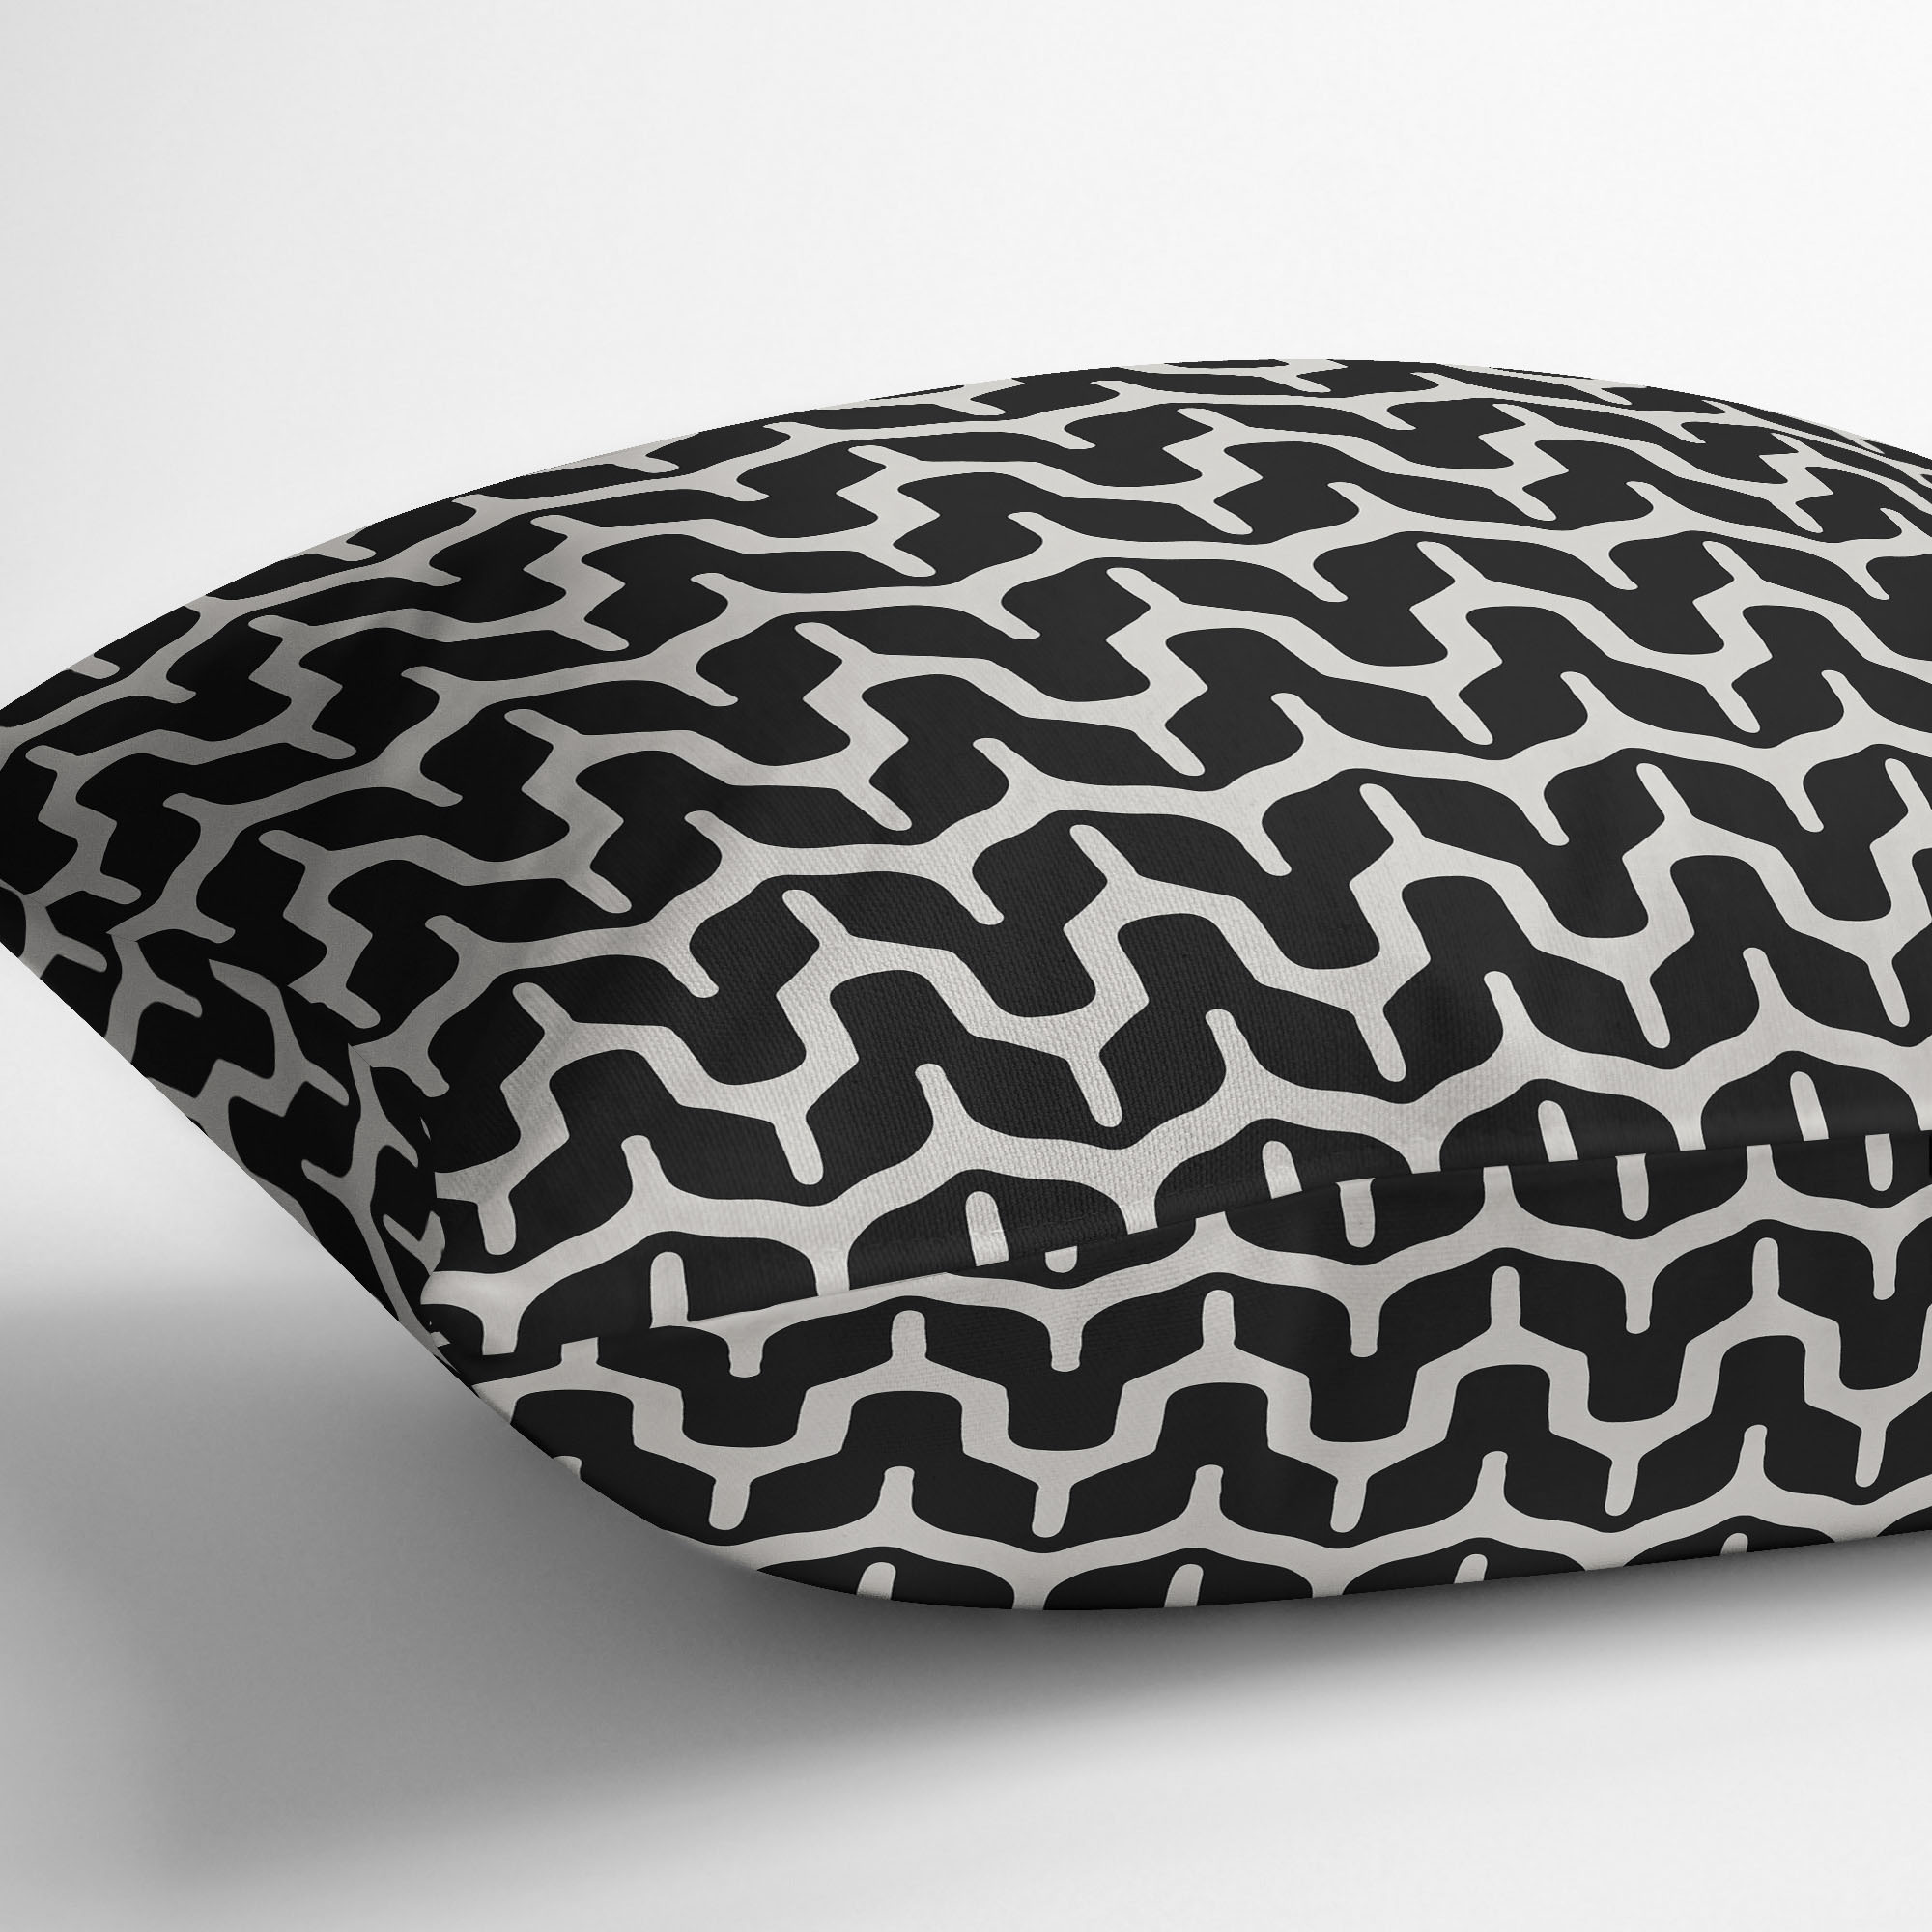 Maria Black and Beige Outdoor Pillow by Kavka Designs - image 4 of 5